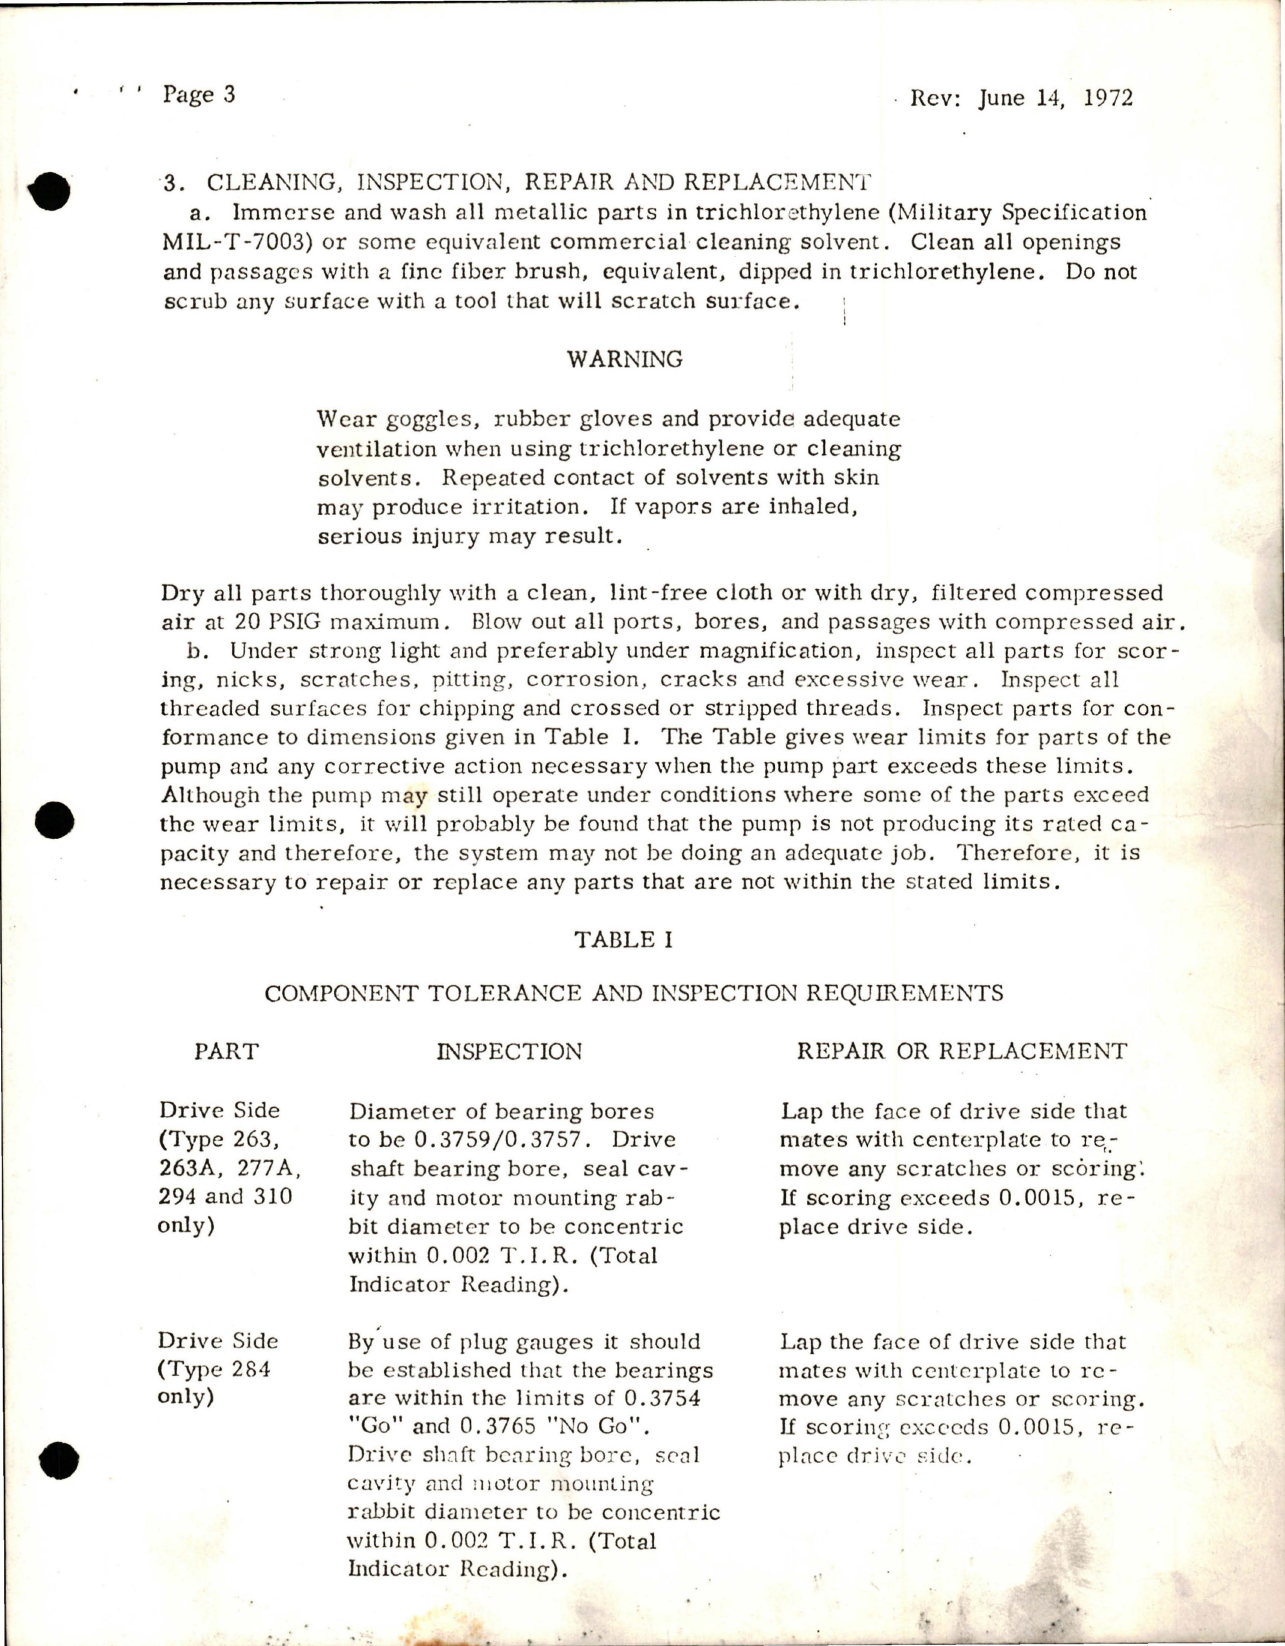 Sample page 5 from AirCorps Library document: Overhaul Instructions for Eastern Industries Hydraulic Pumps